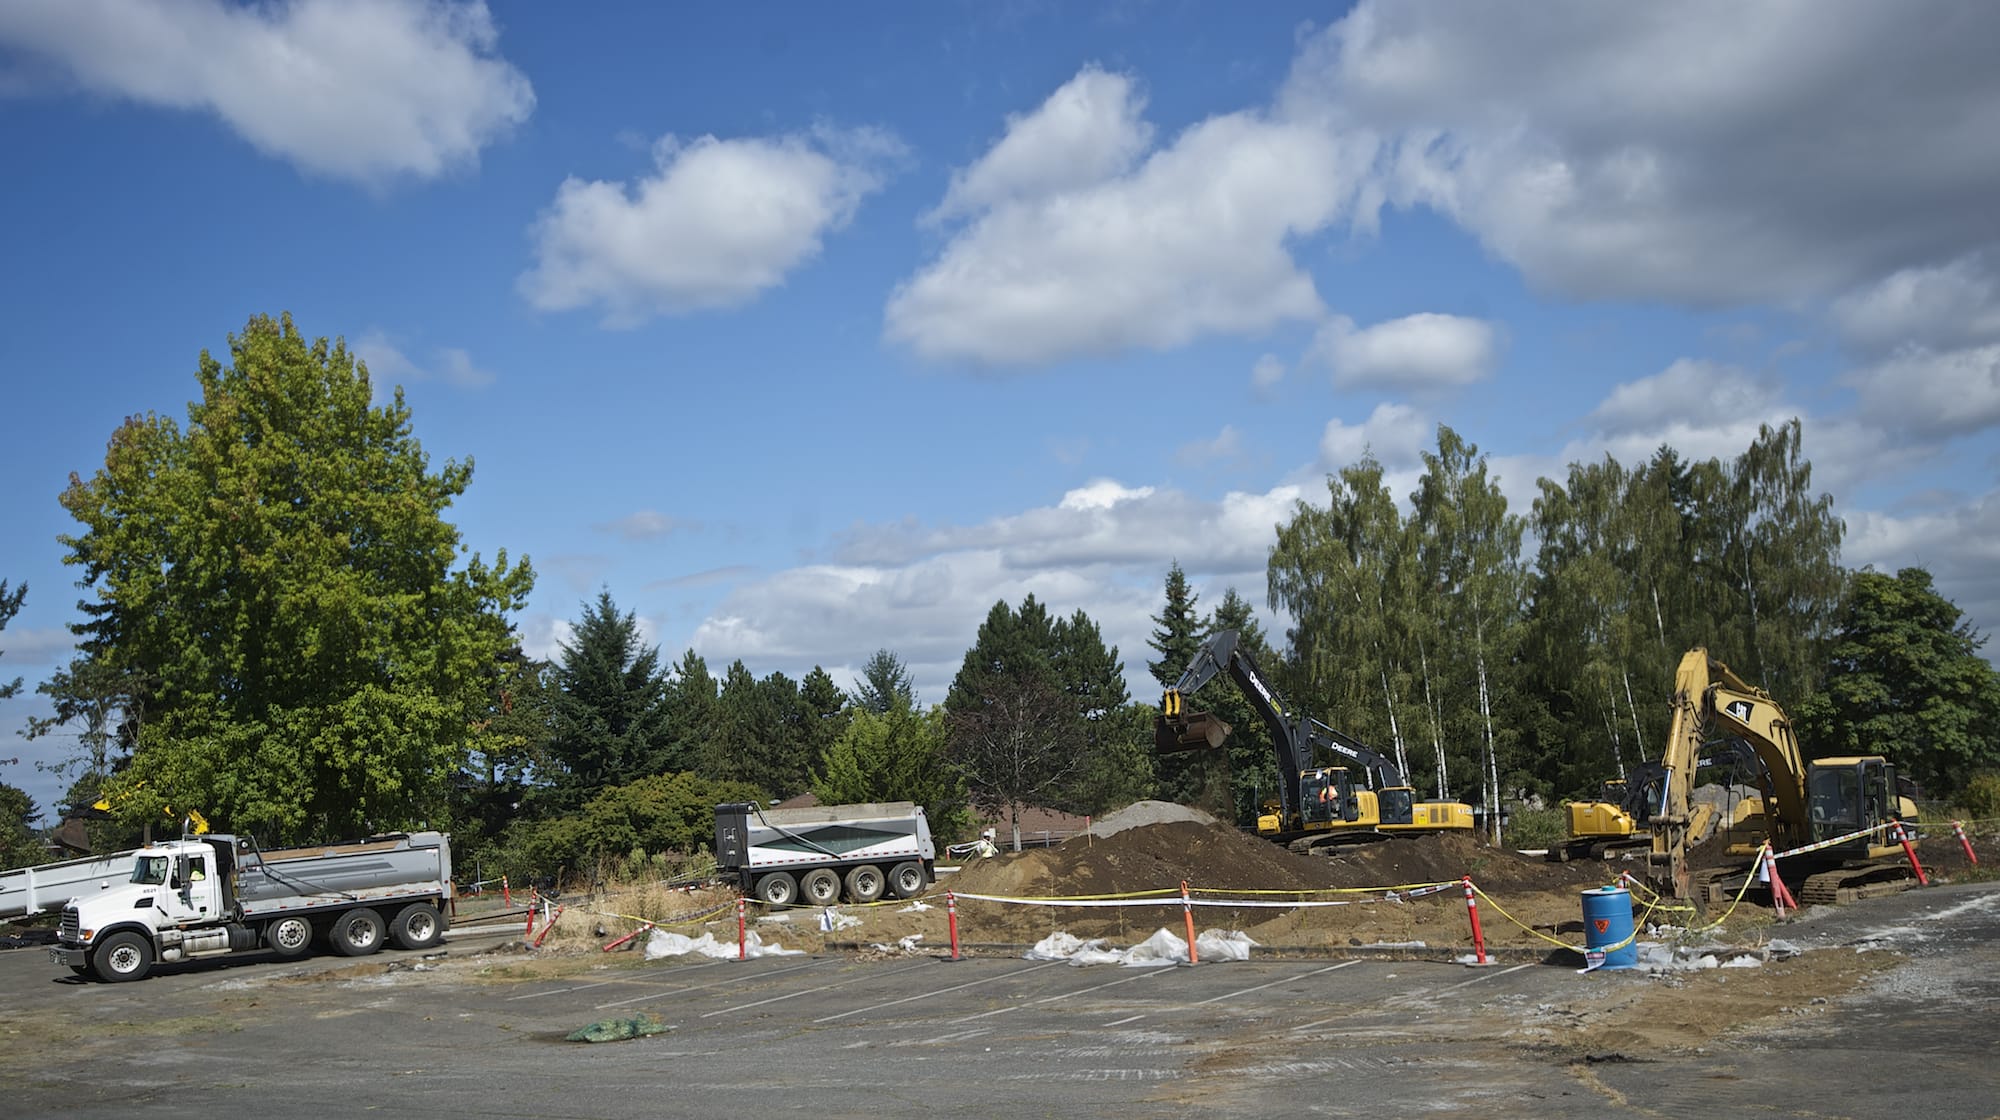 Constructions crews began preliminary work on Wednesday for Clark College's new science, technology, engineering and mathematics, or STEM, facility on the west side of Fort Vancouver Way.